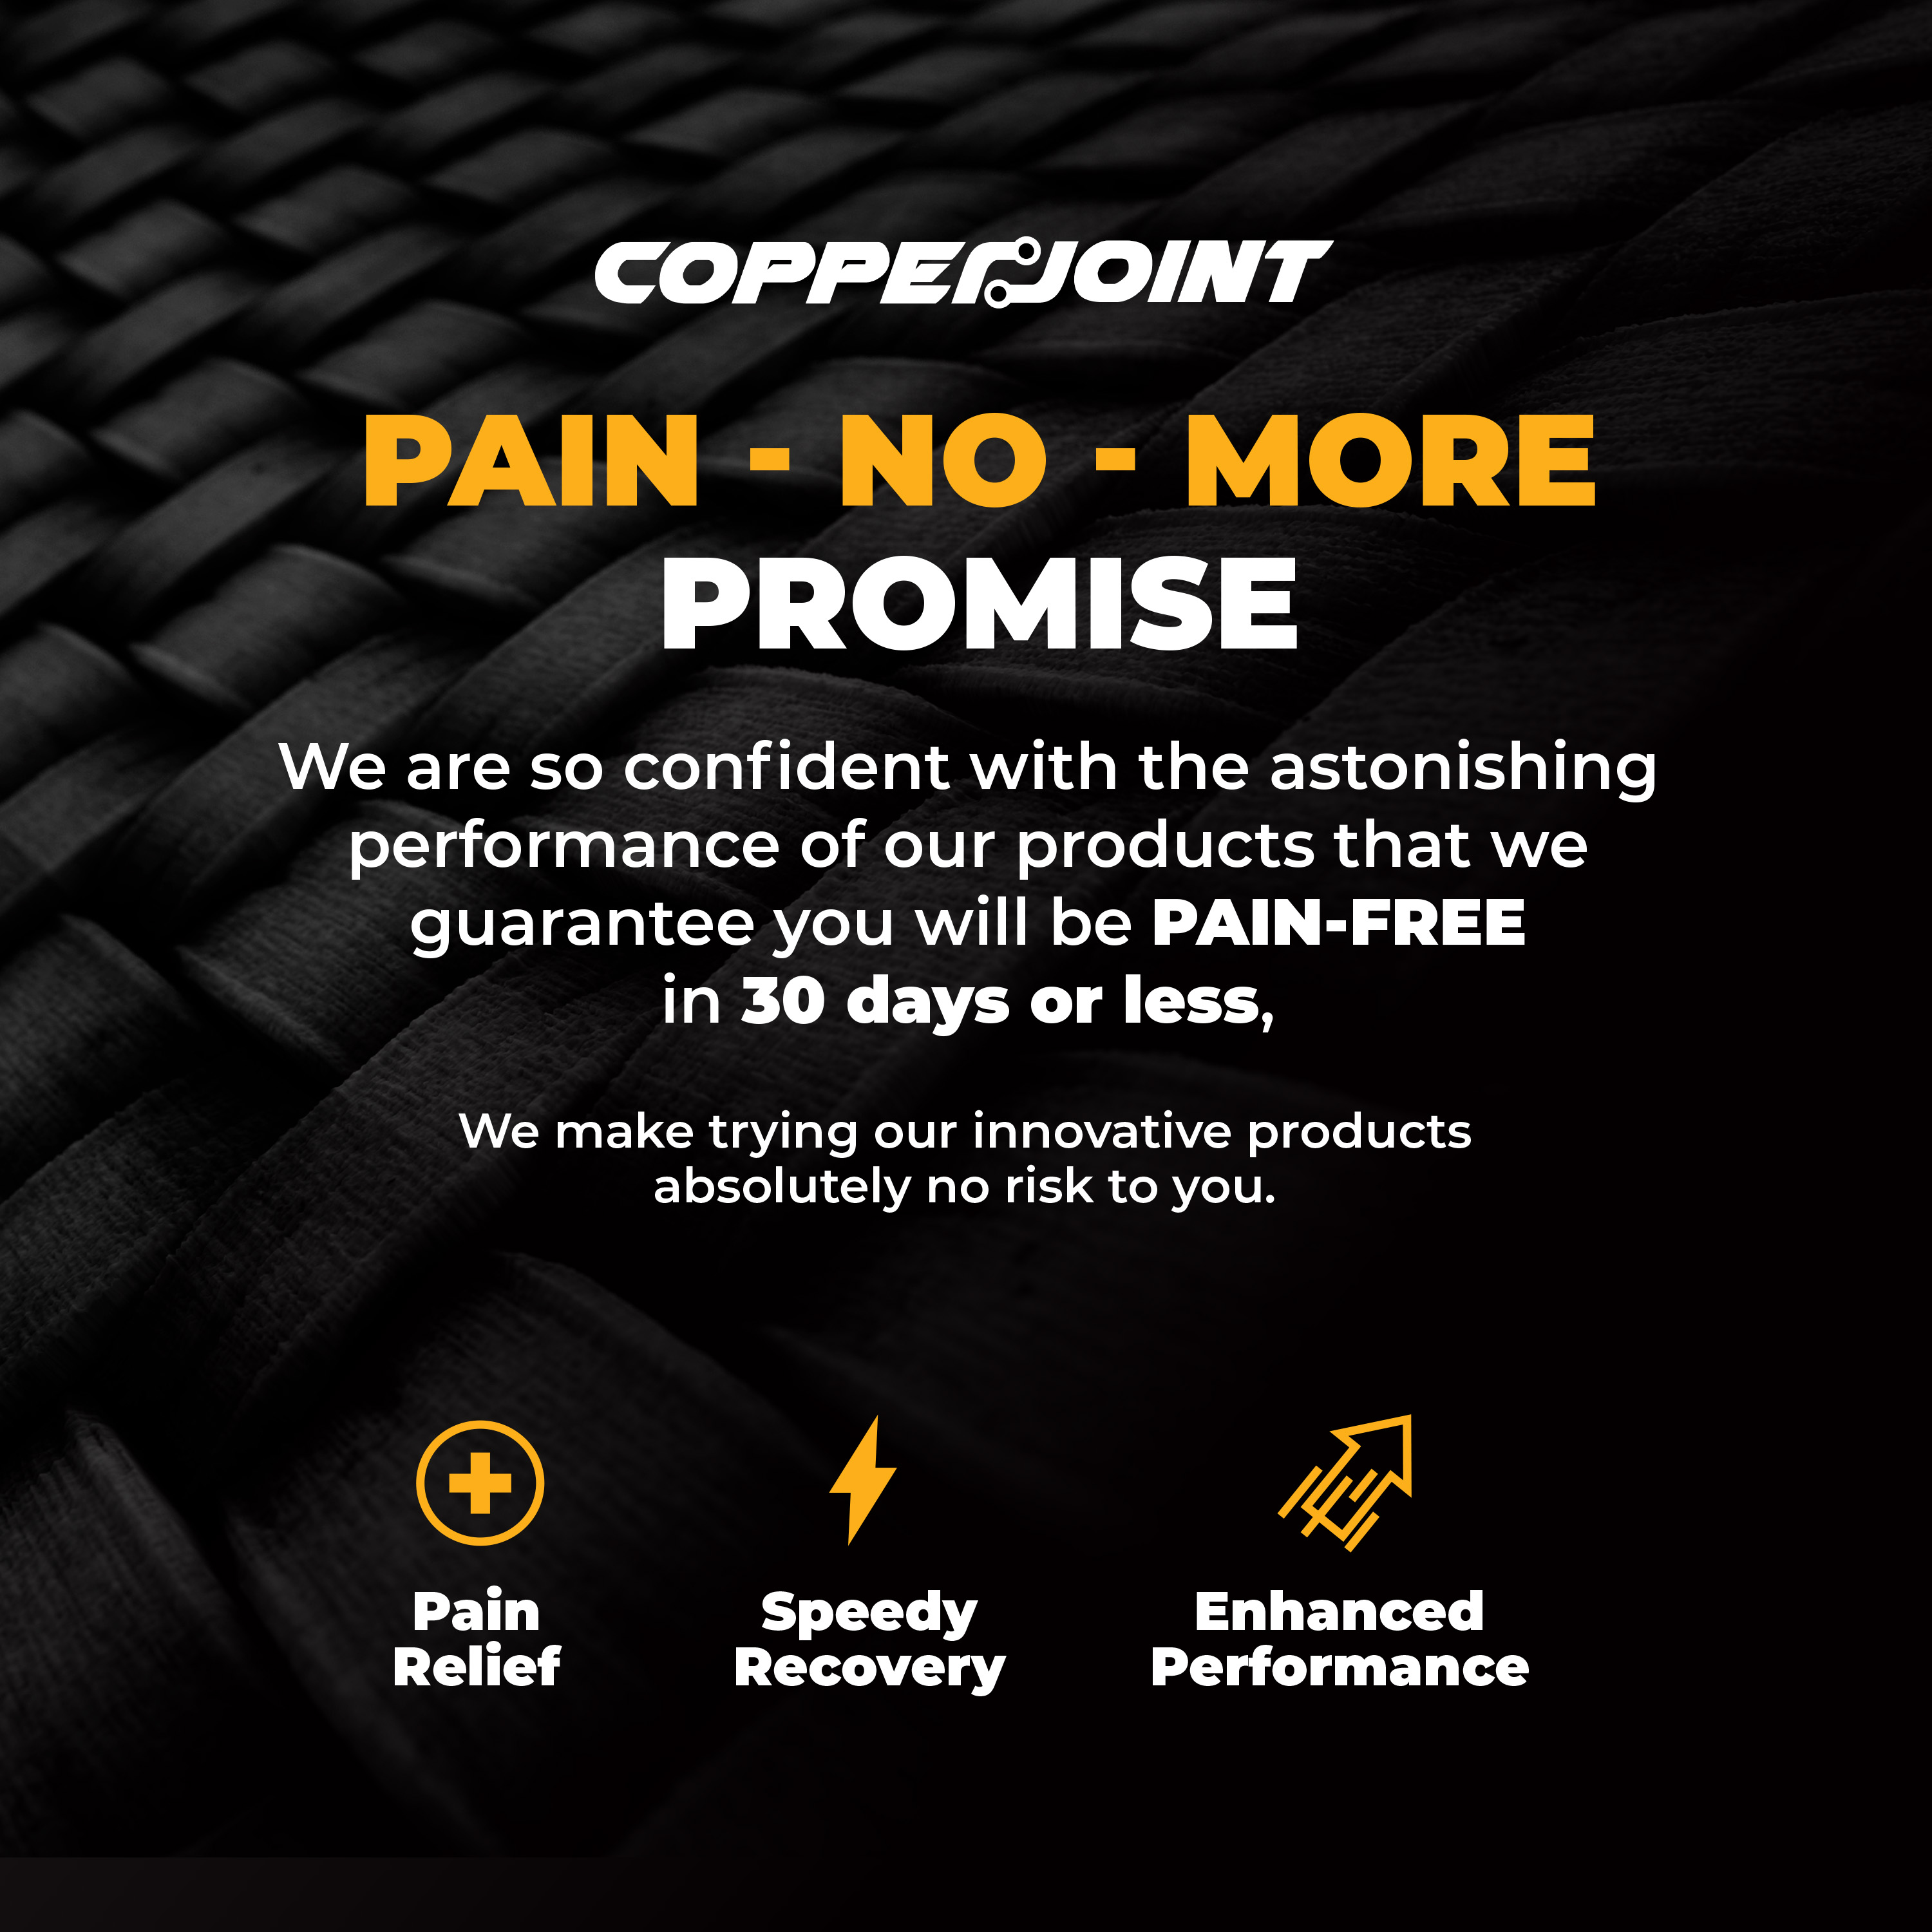 CopperJoint Shoulder Sling For Torn Rotator Cuff Launch Ends on a High After Exceptional Sales